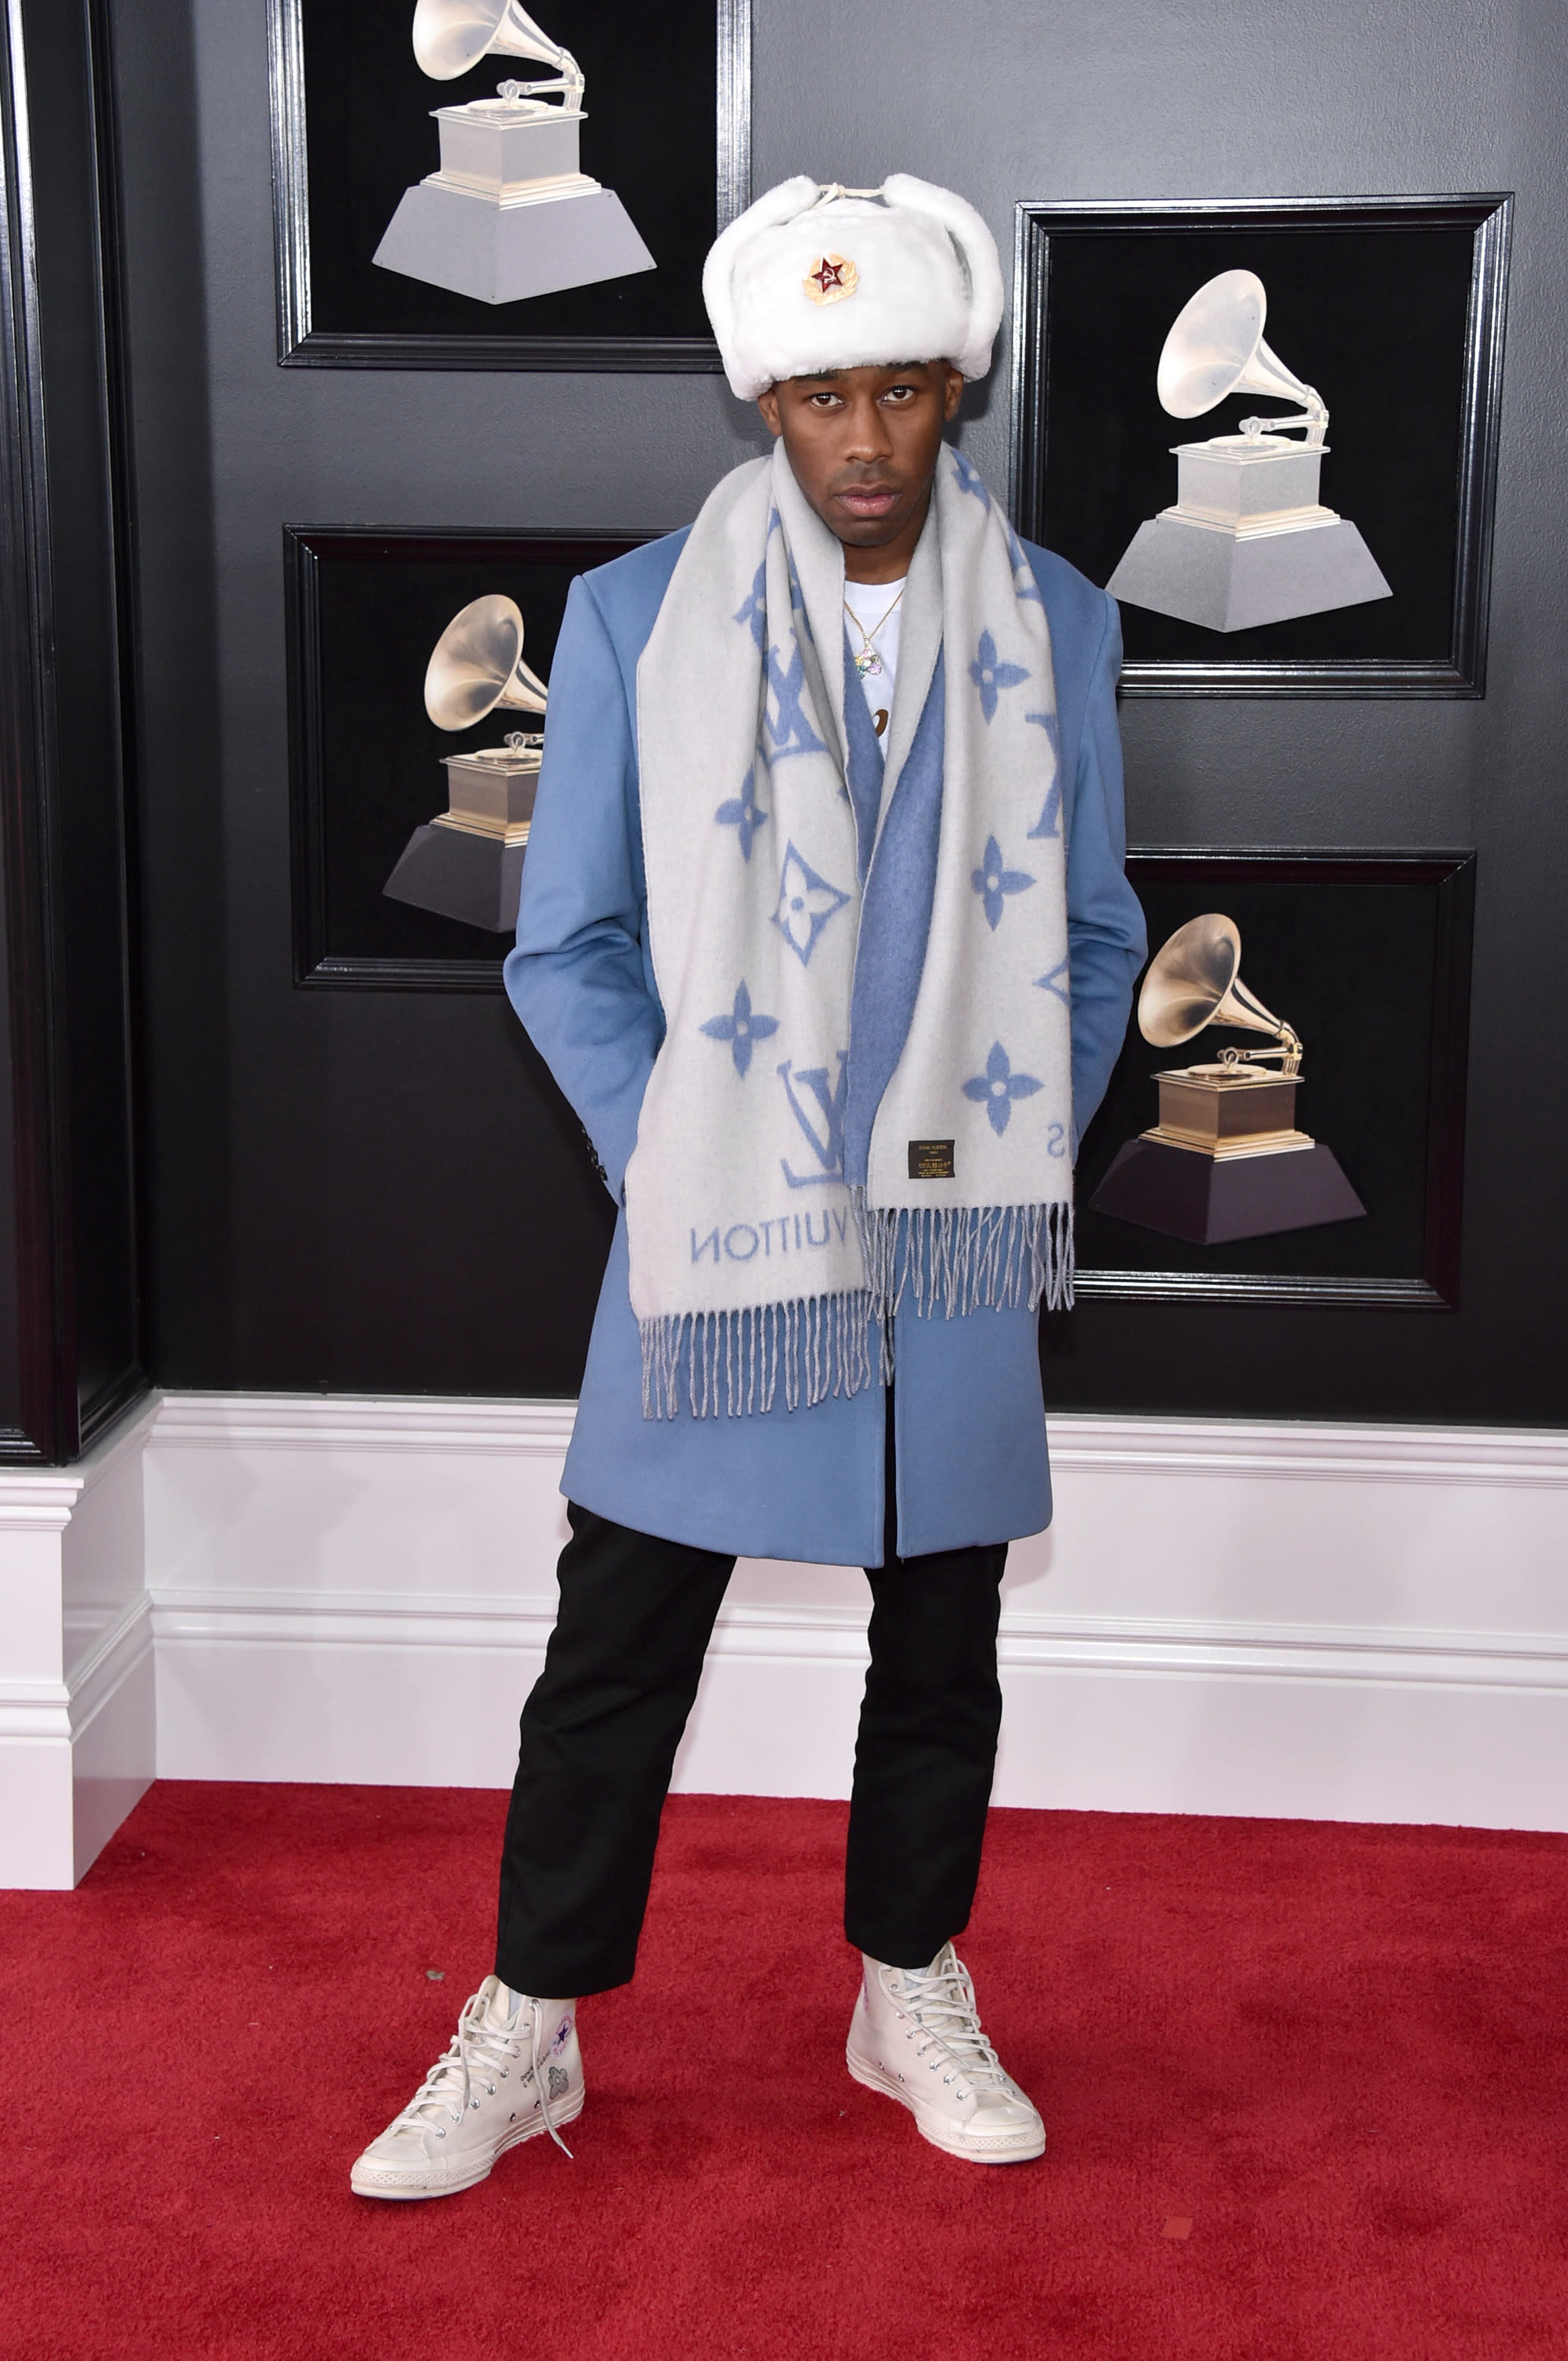 Best Style Moments From the 2018 Grammys | Complex1993 x 3000